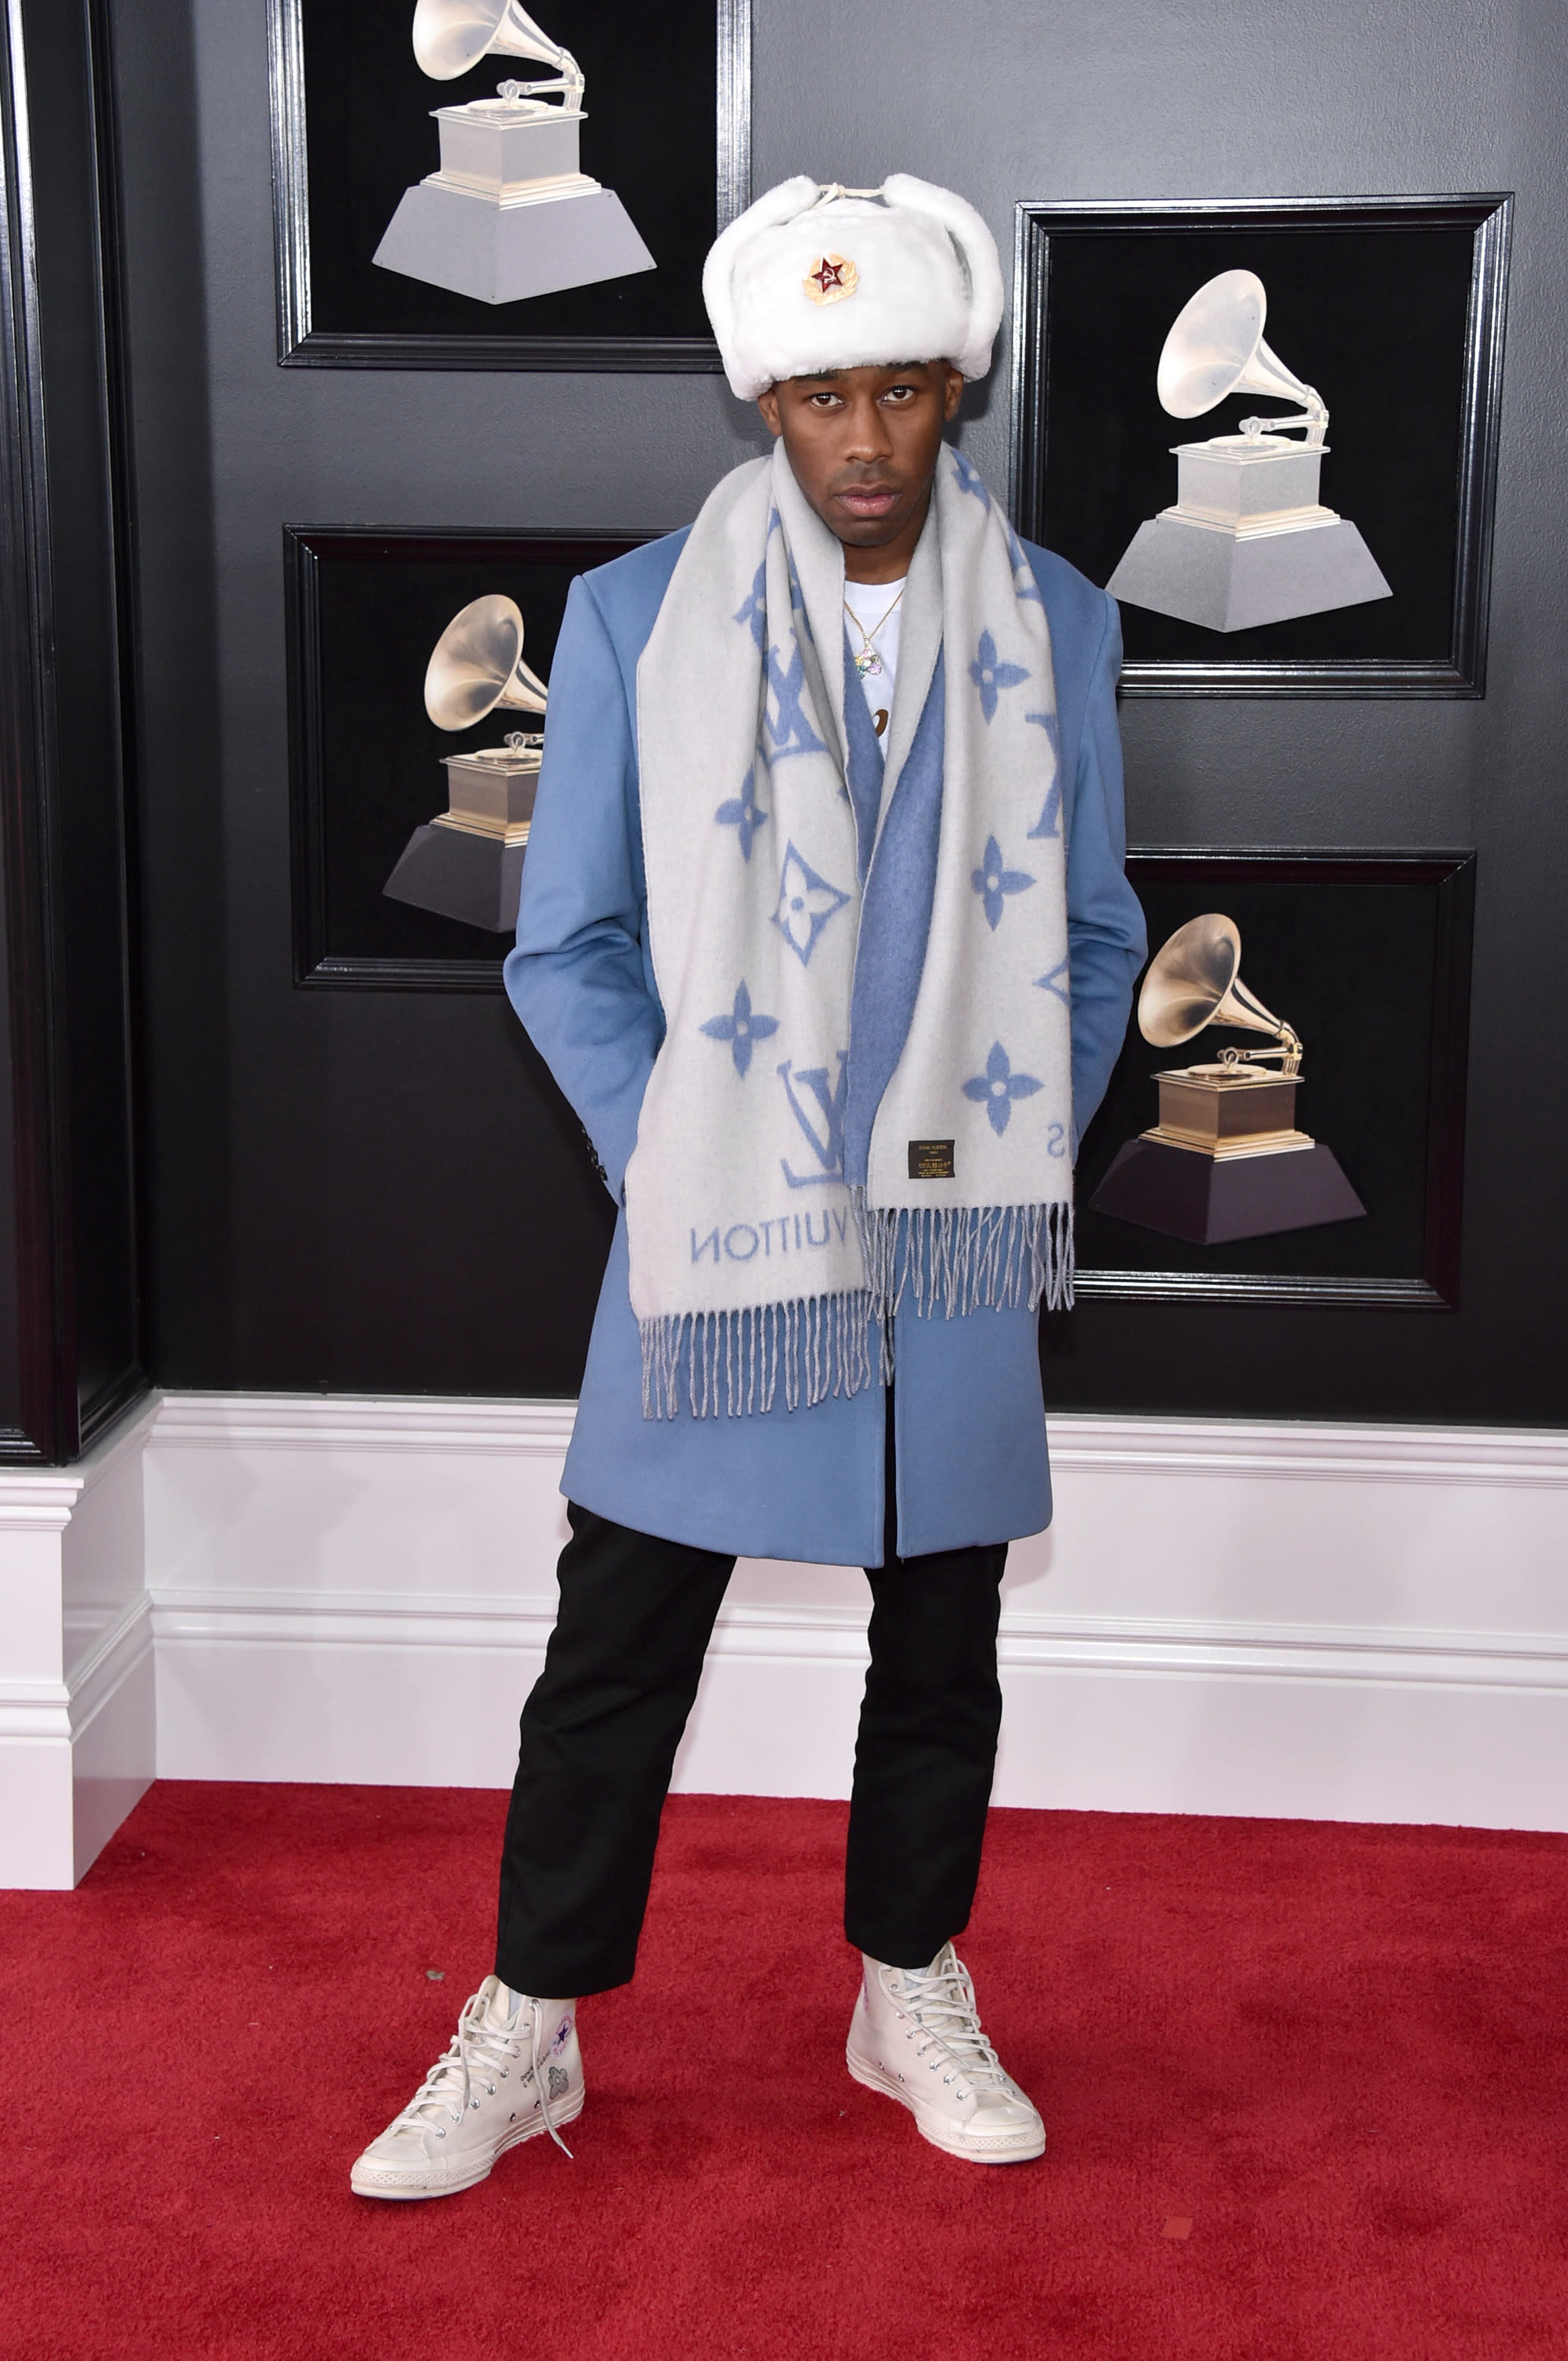 Best Style Moments From the 2018 Grammys | Complex1993 x 3000